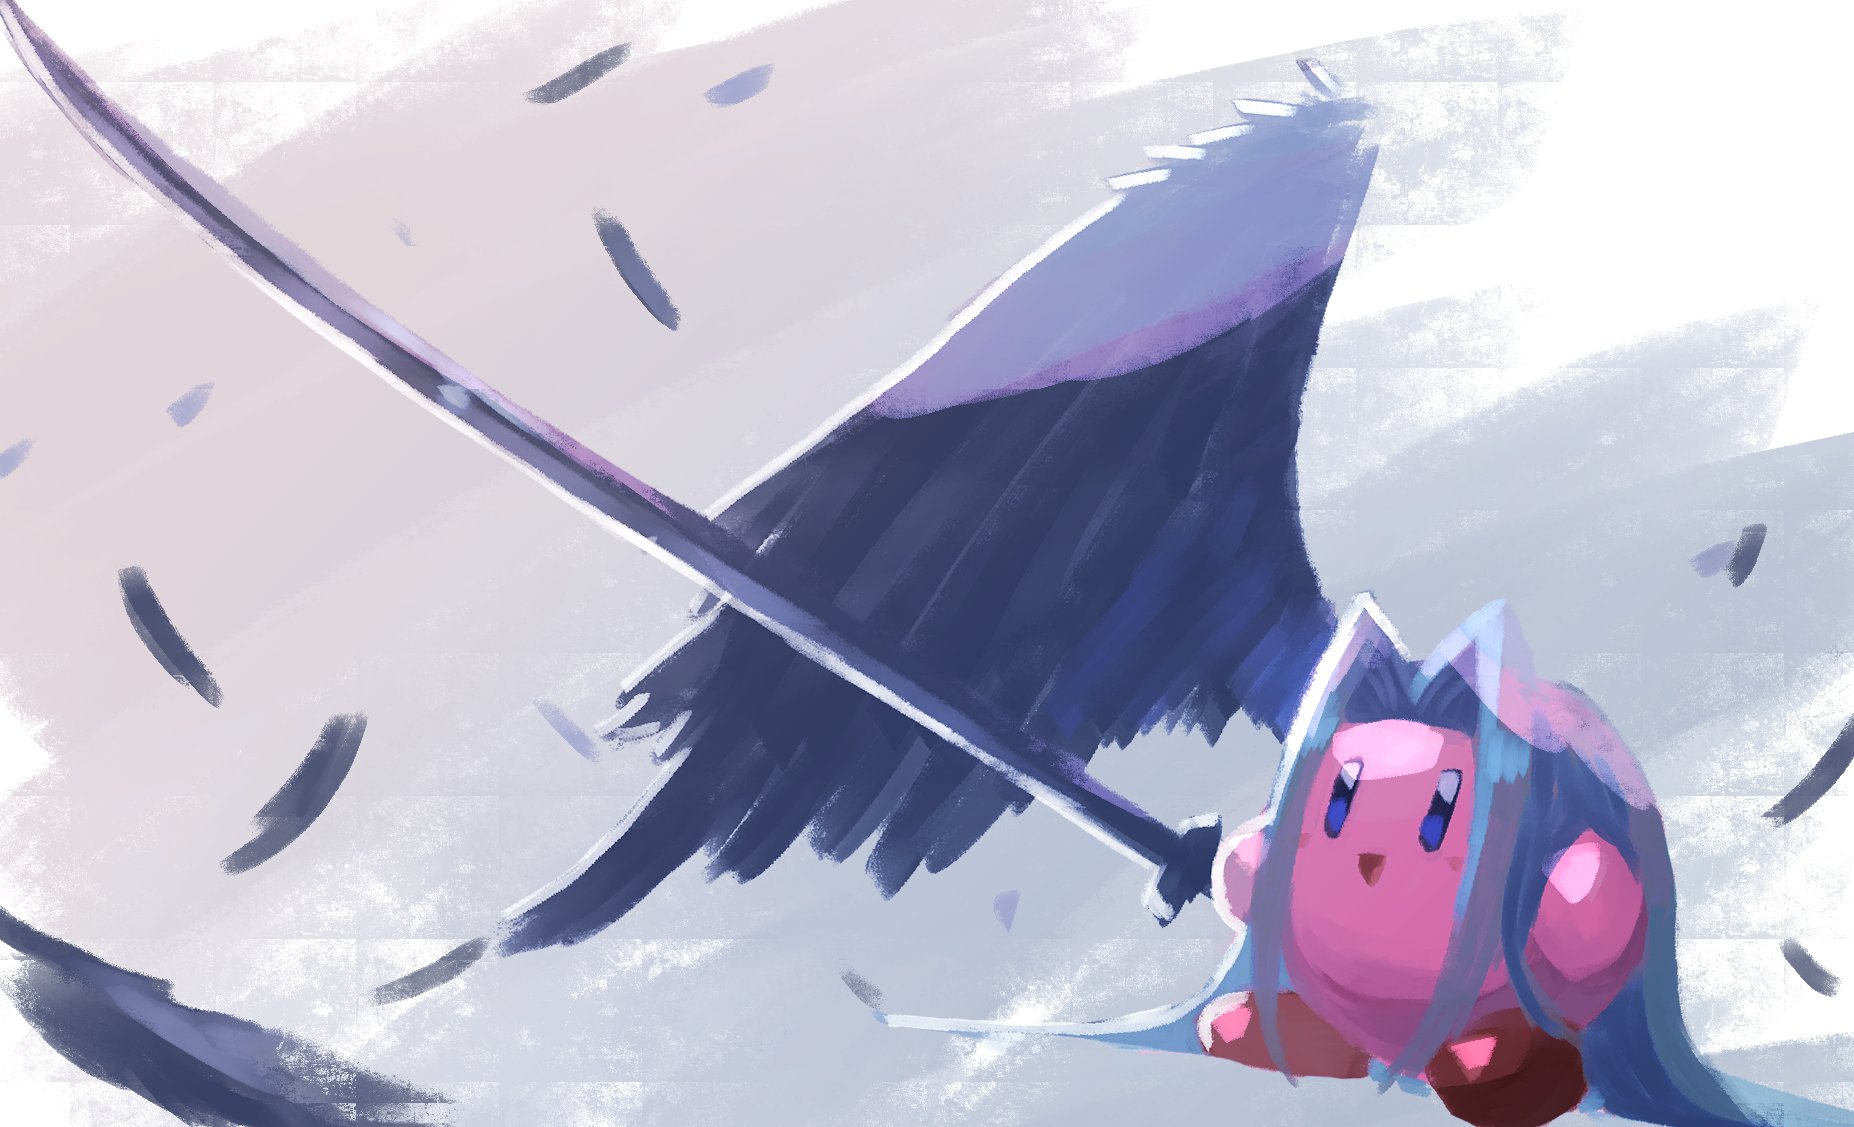 __kirby_and_sephiroth_final_fantasy_and_3_more_drawn_by_bloodymooncook__5cba35b6f9464f4503989e414540fc16.jpg